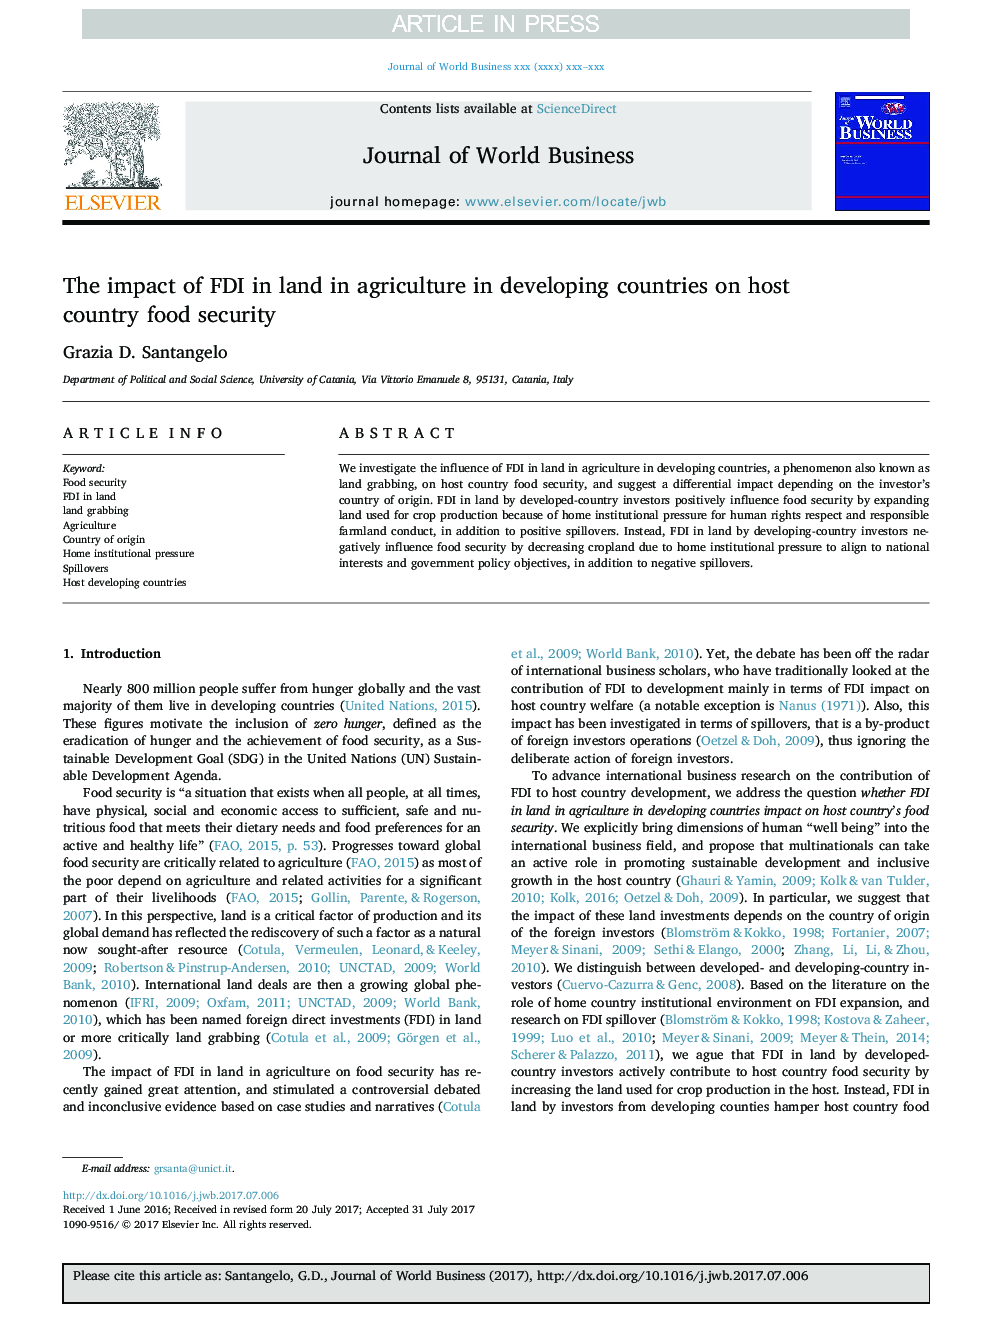 The impact of FDI in land in agriculture in developing countries on host country food security